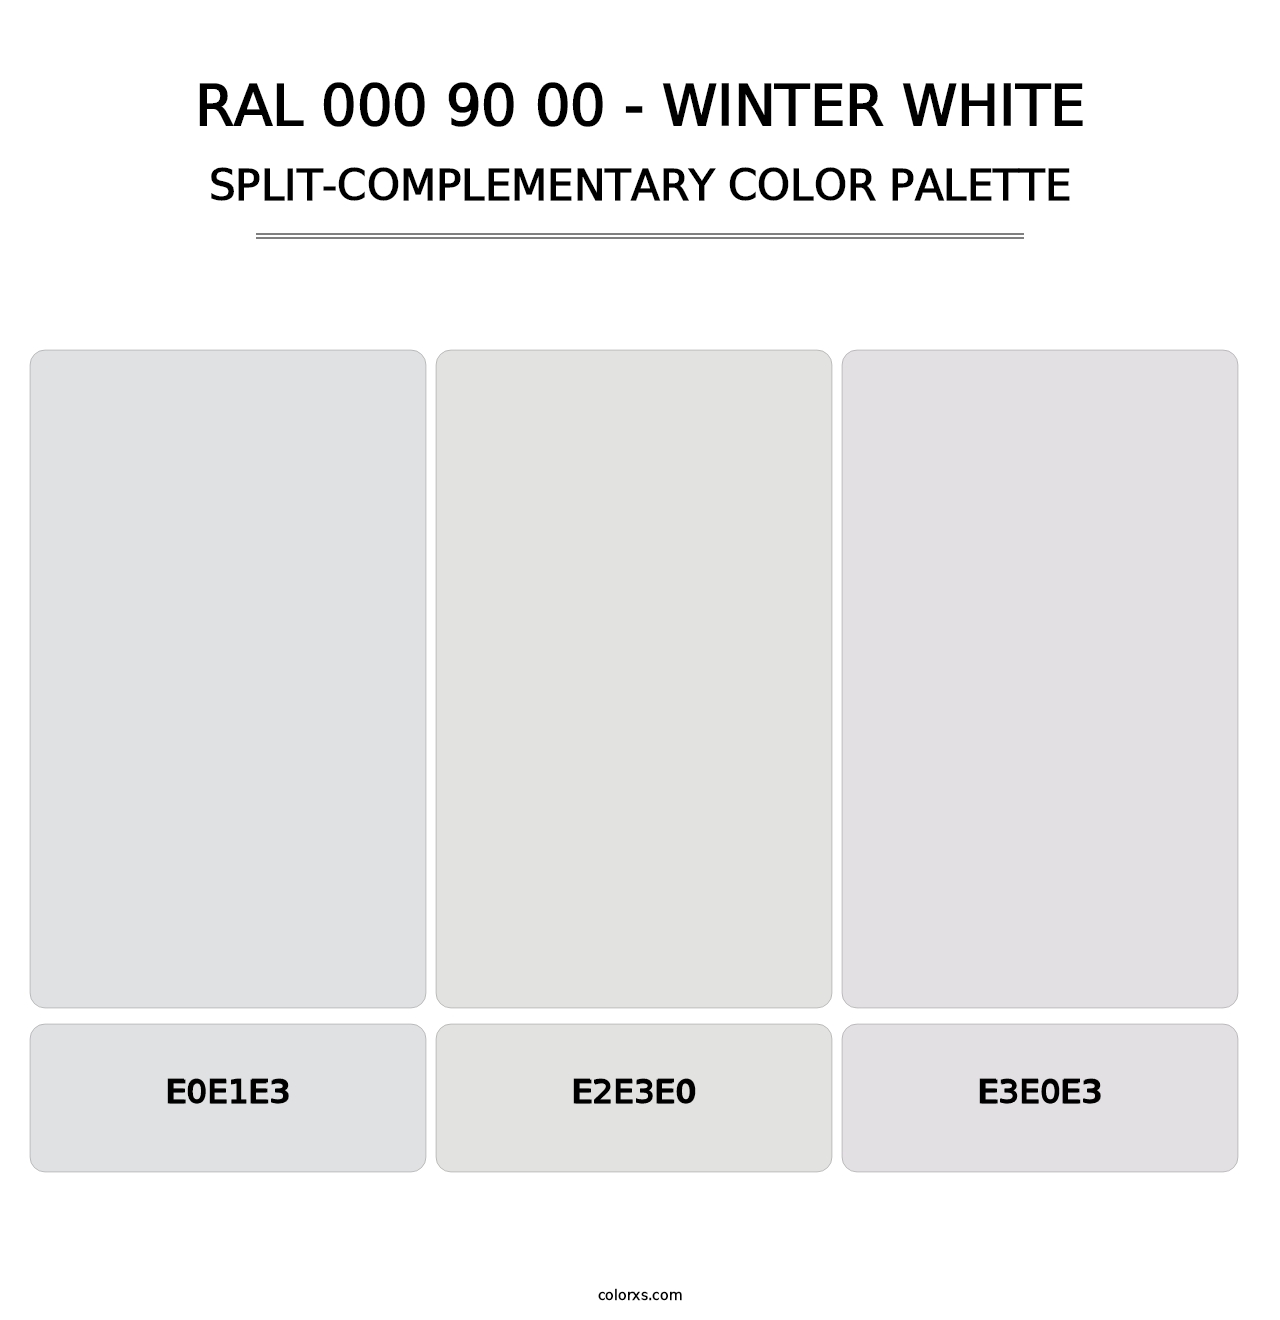 RAL 000 90 00 - Winter White - Split-Complementary Color Palette